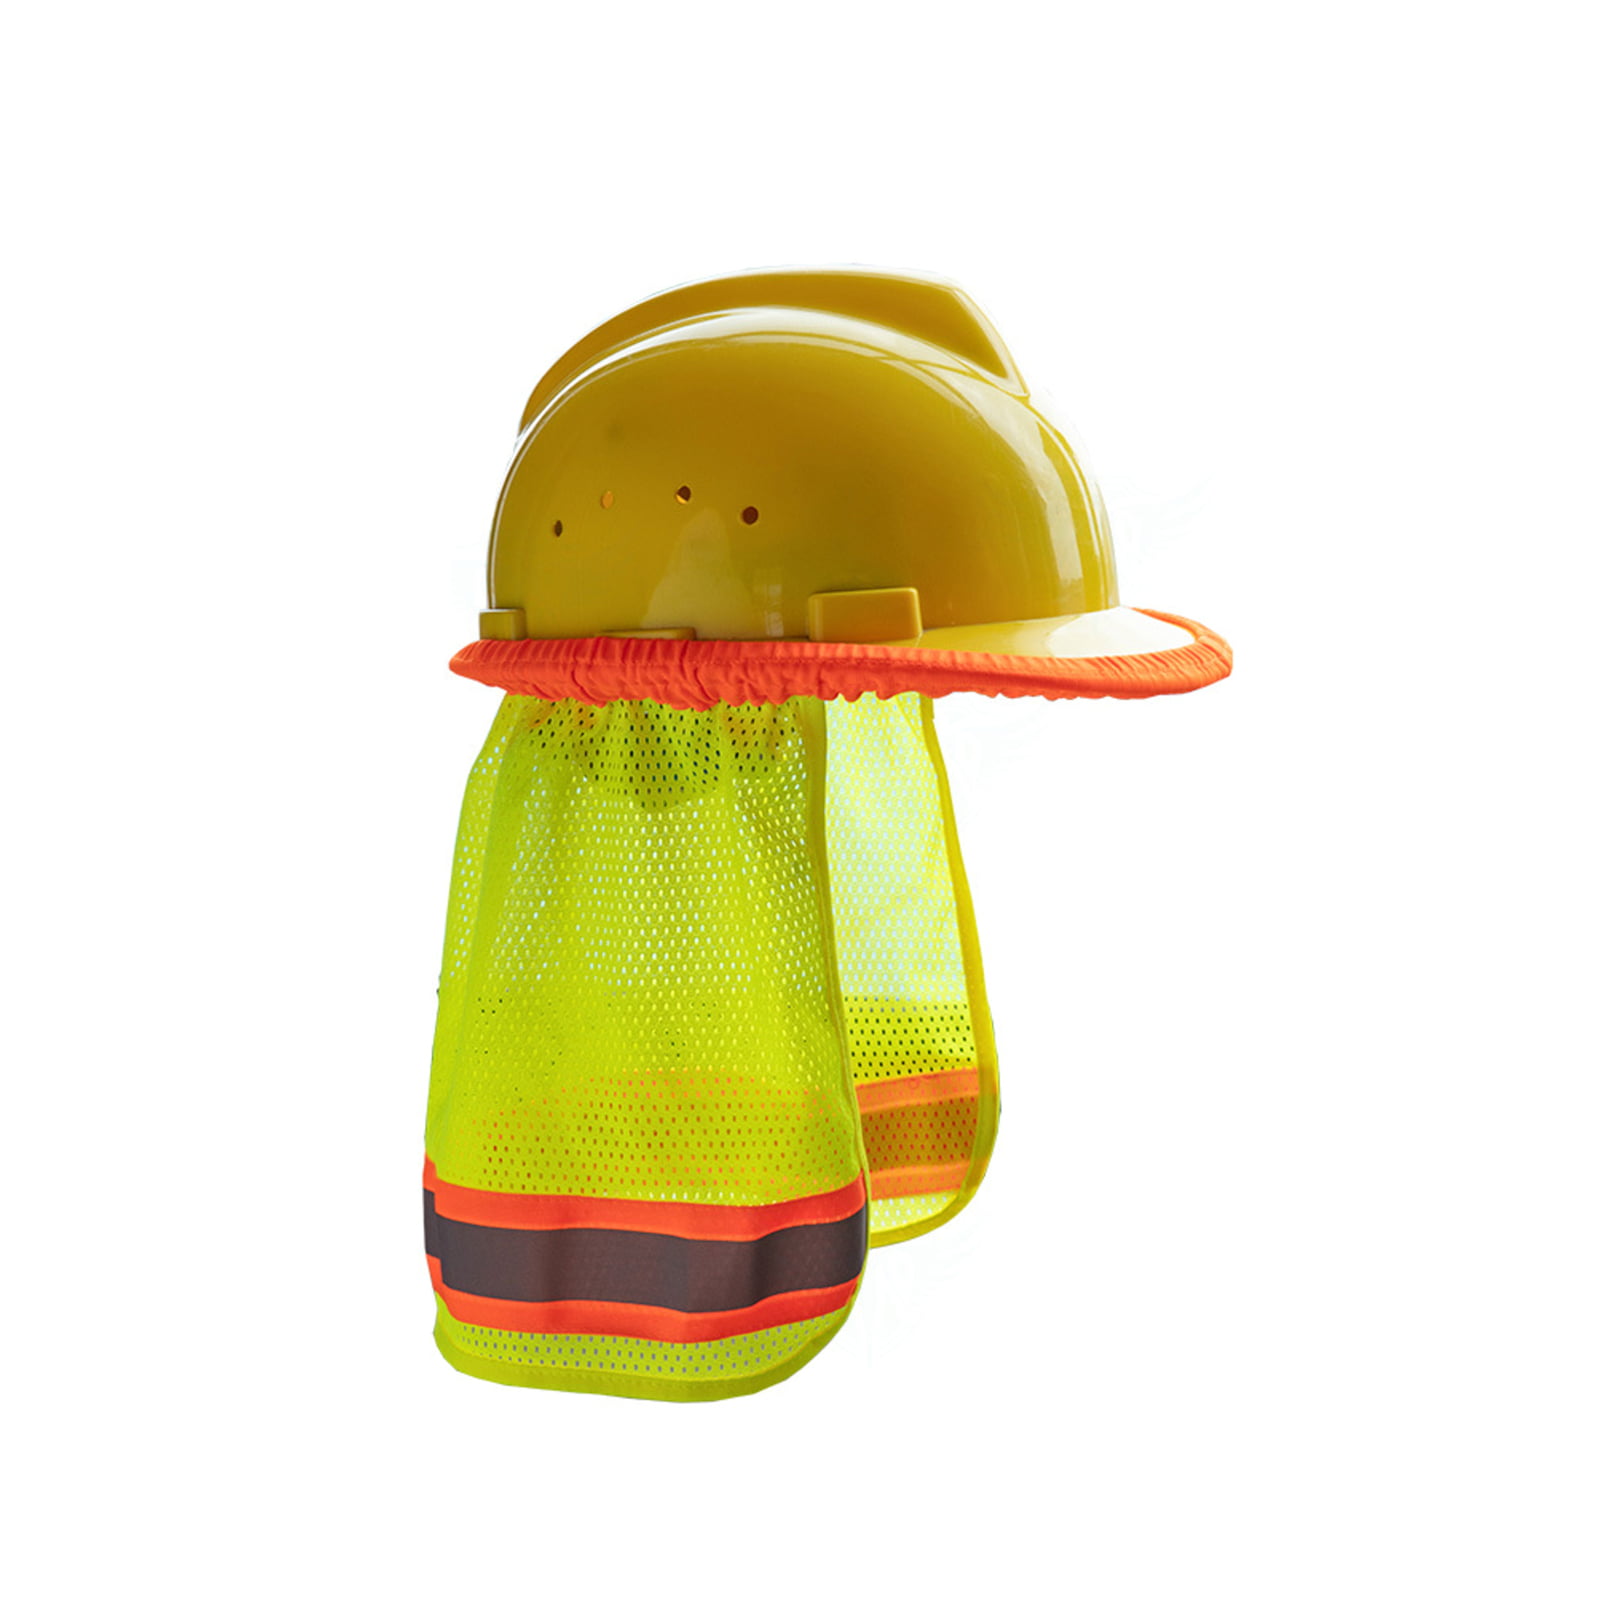 Bump Cap Work Safety Helmet With Reflective Stripe Summer Breathable Security An 